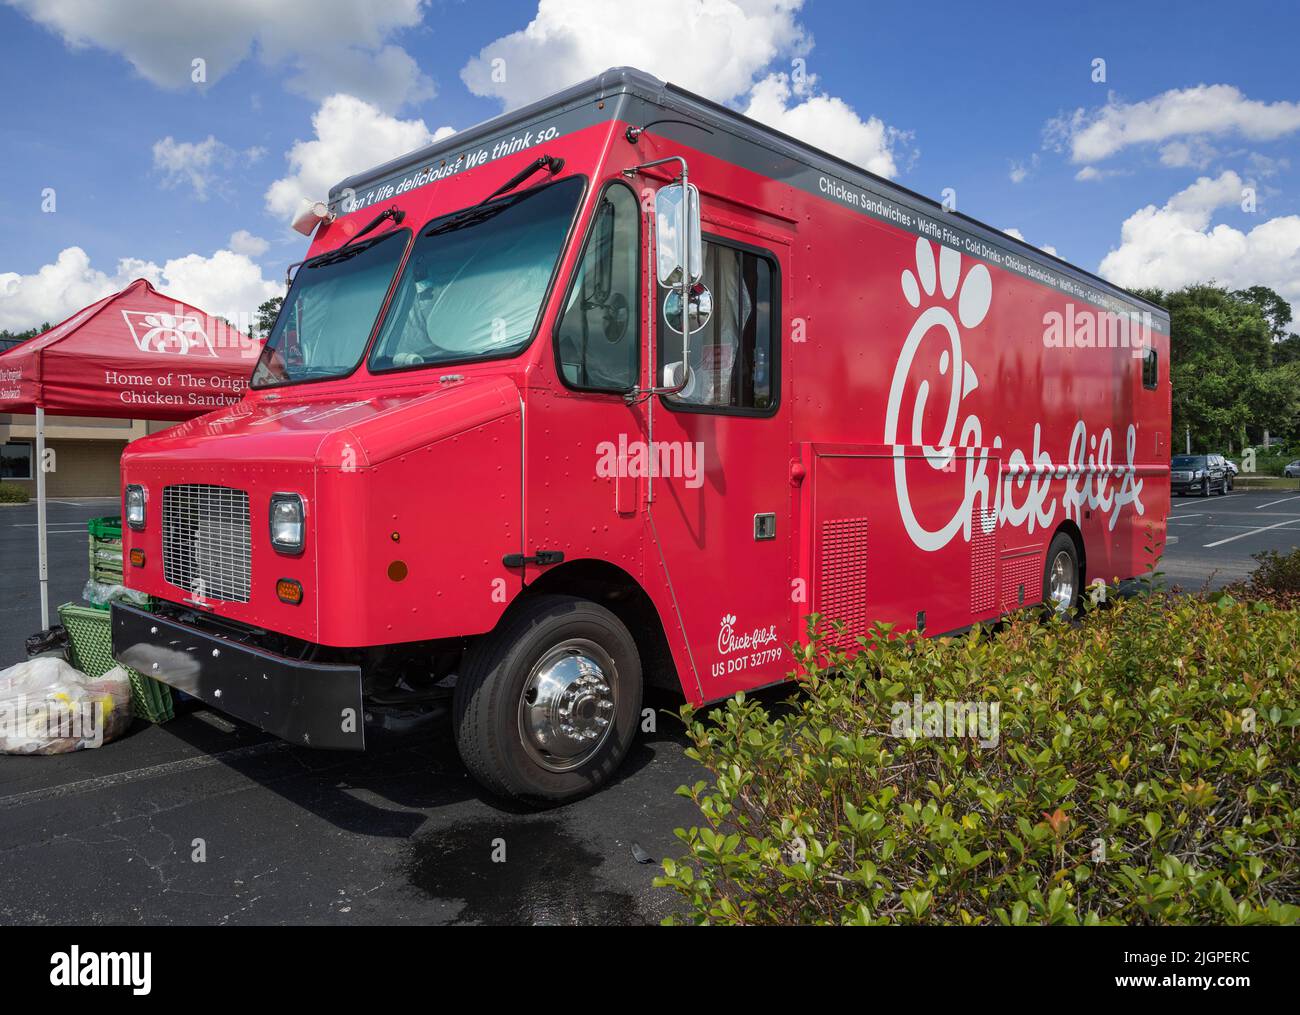 A mobile Chick-Fil-A, truck serves its goodies while parked in a shopping center parking lot in North Central Florida. Stock Photo